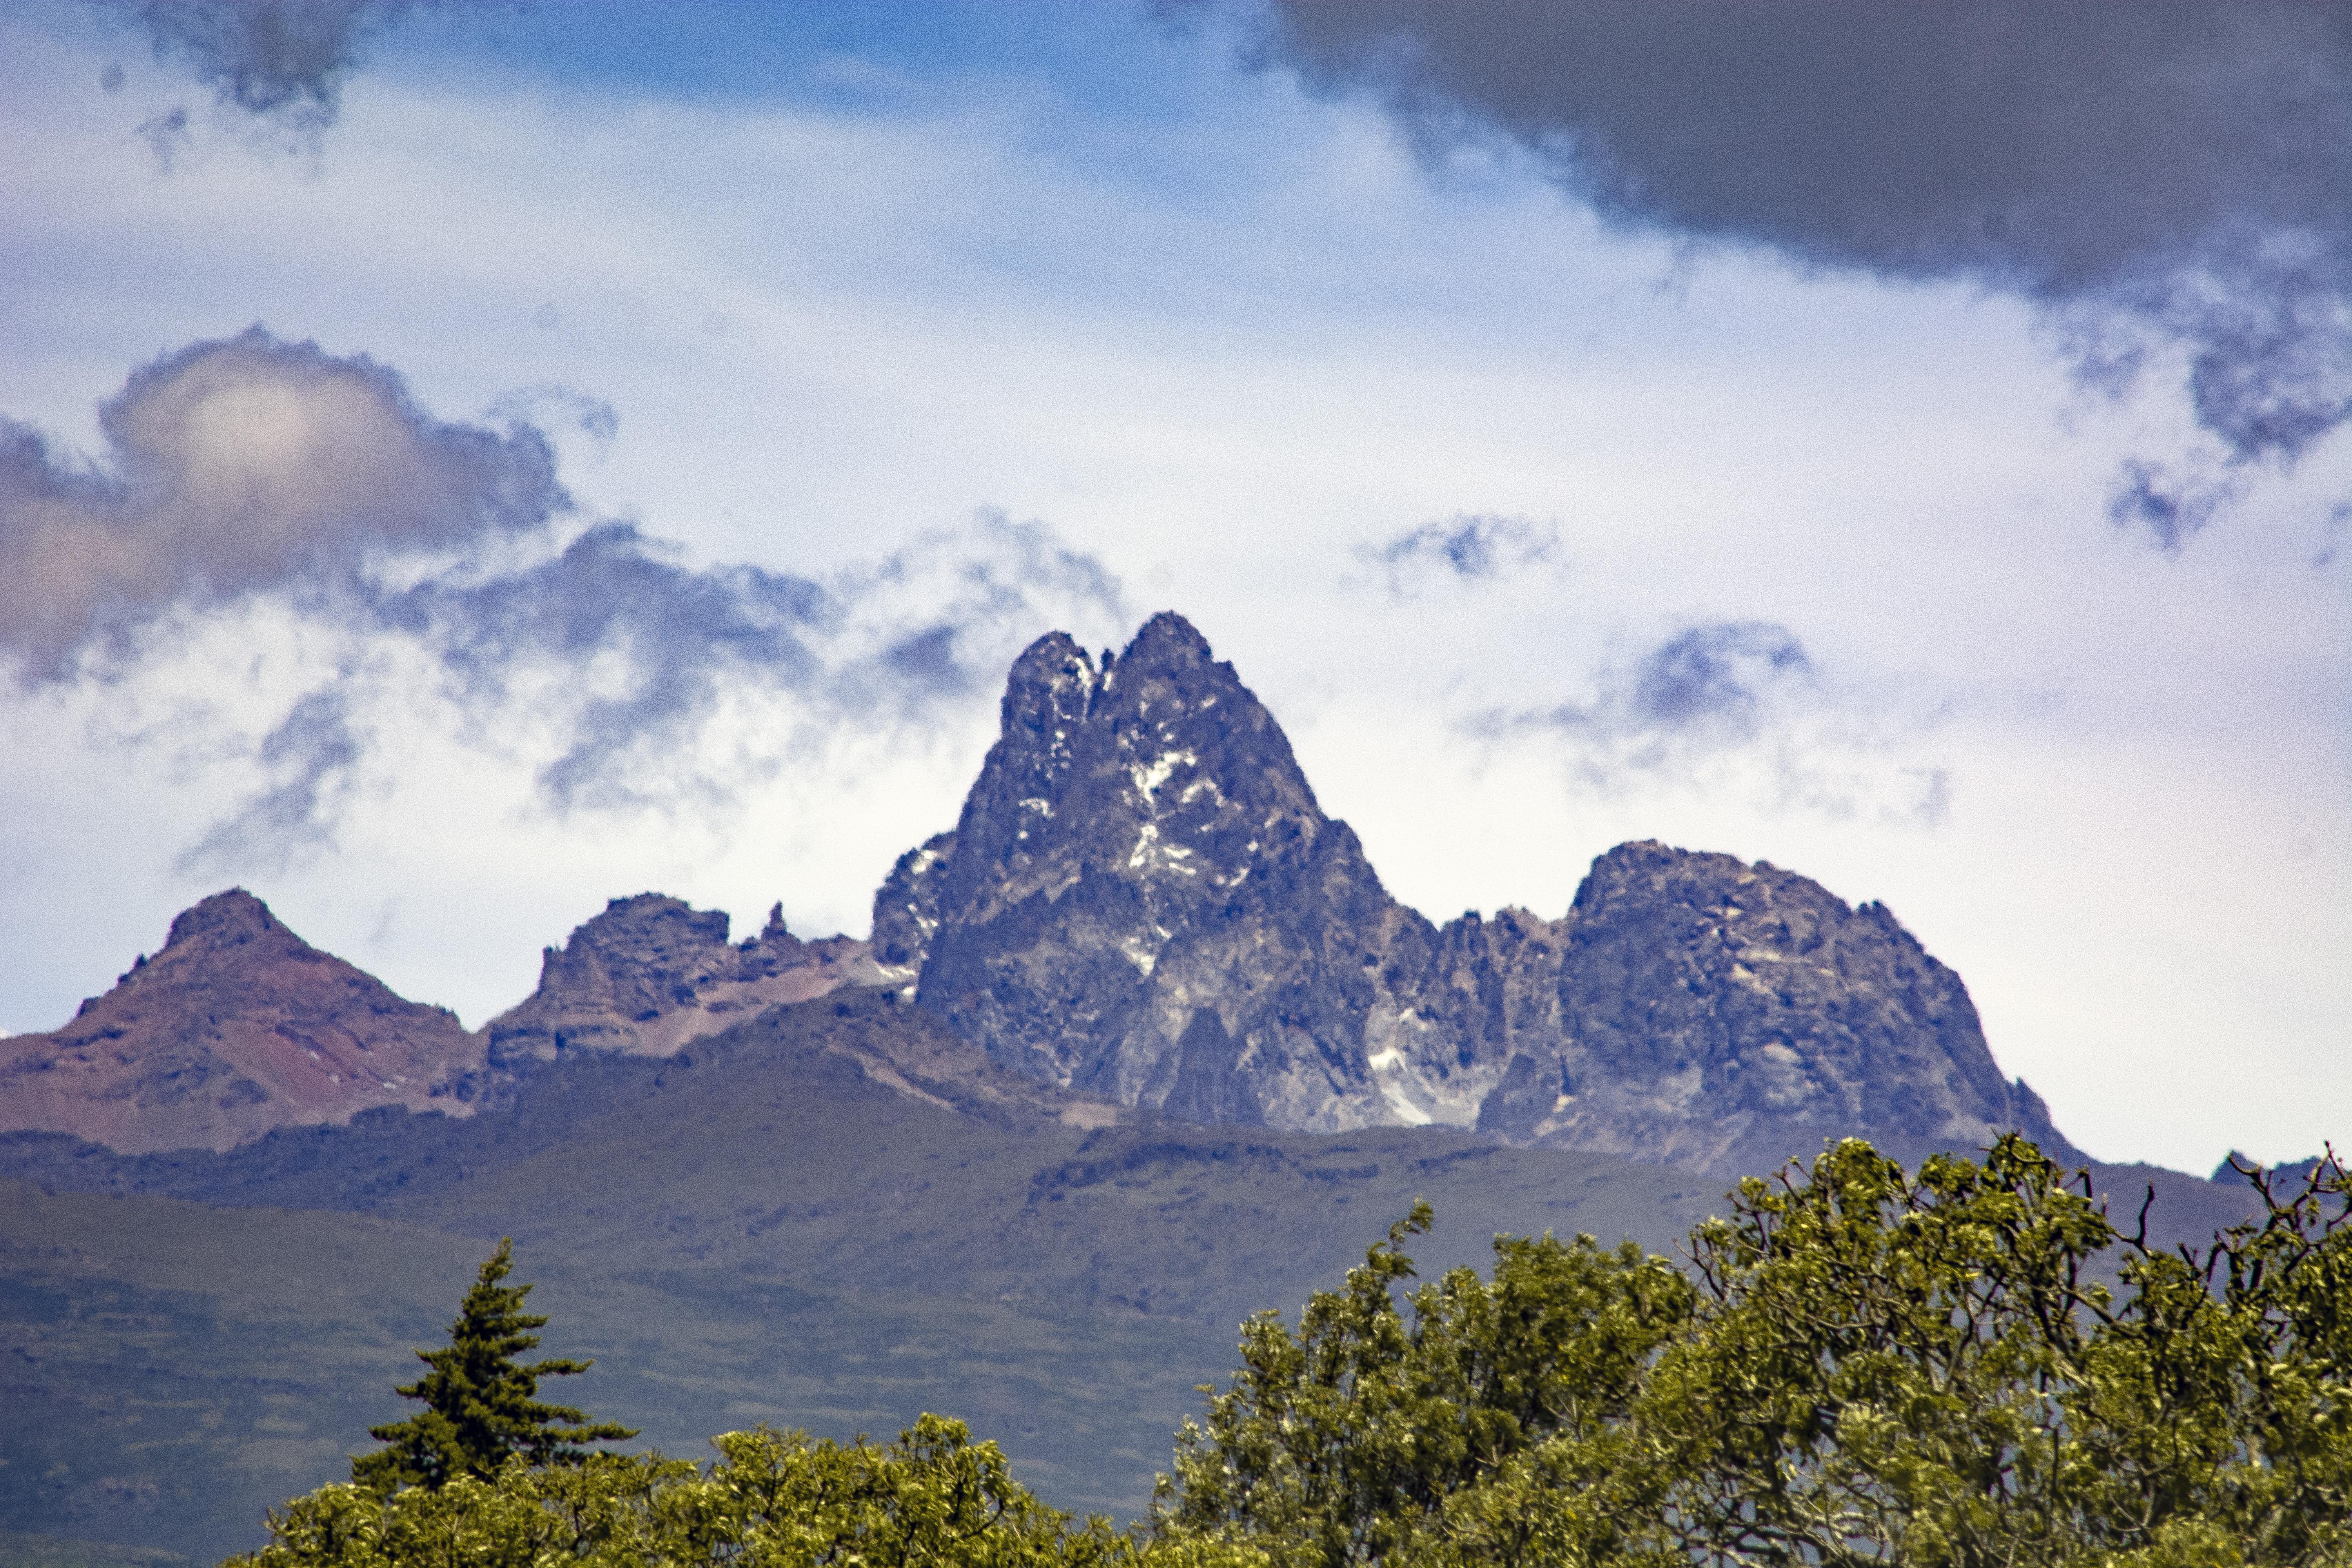 2. Wholesome Rituals and Symbolism: A Glimpse into the Intricate Harvest Festivities of Mount Kenya